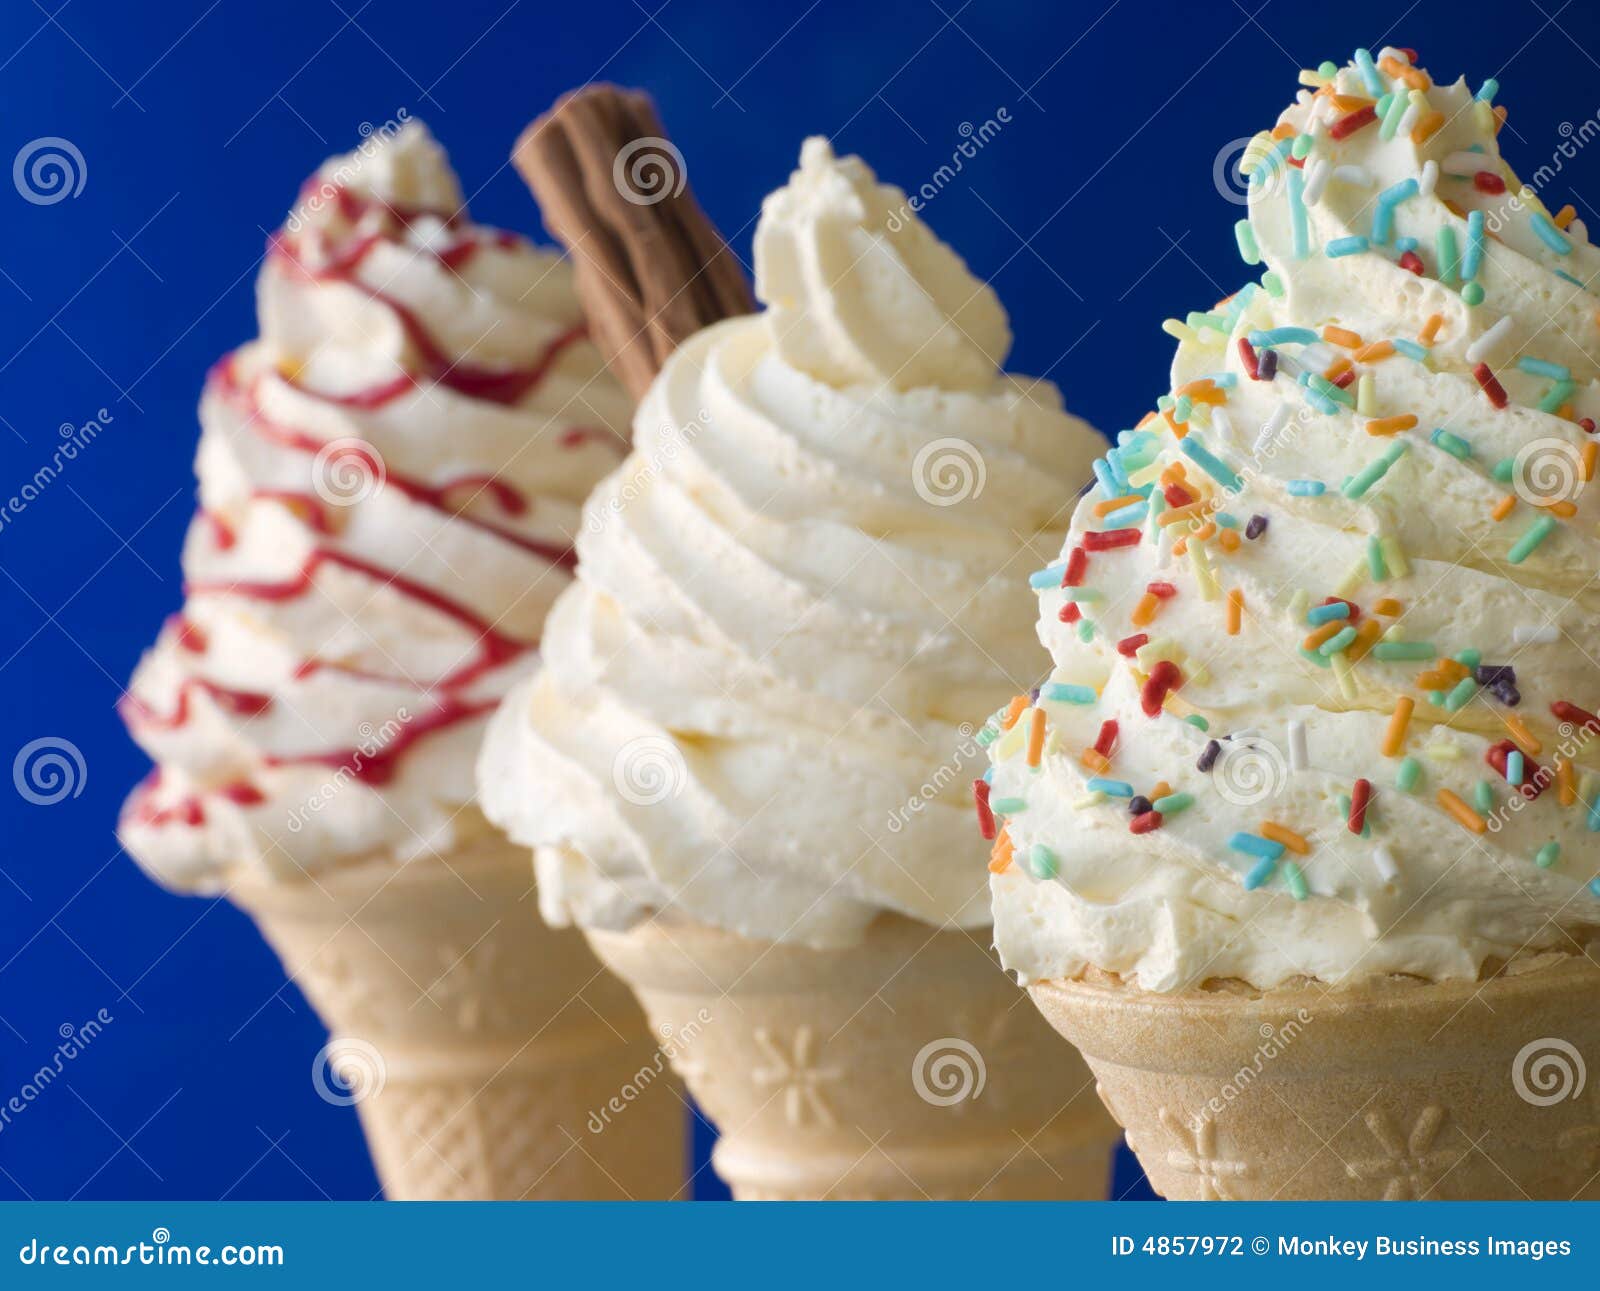 whipped ice cream cones toppings